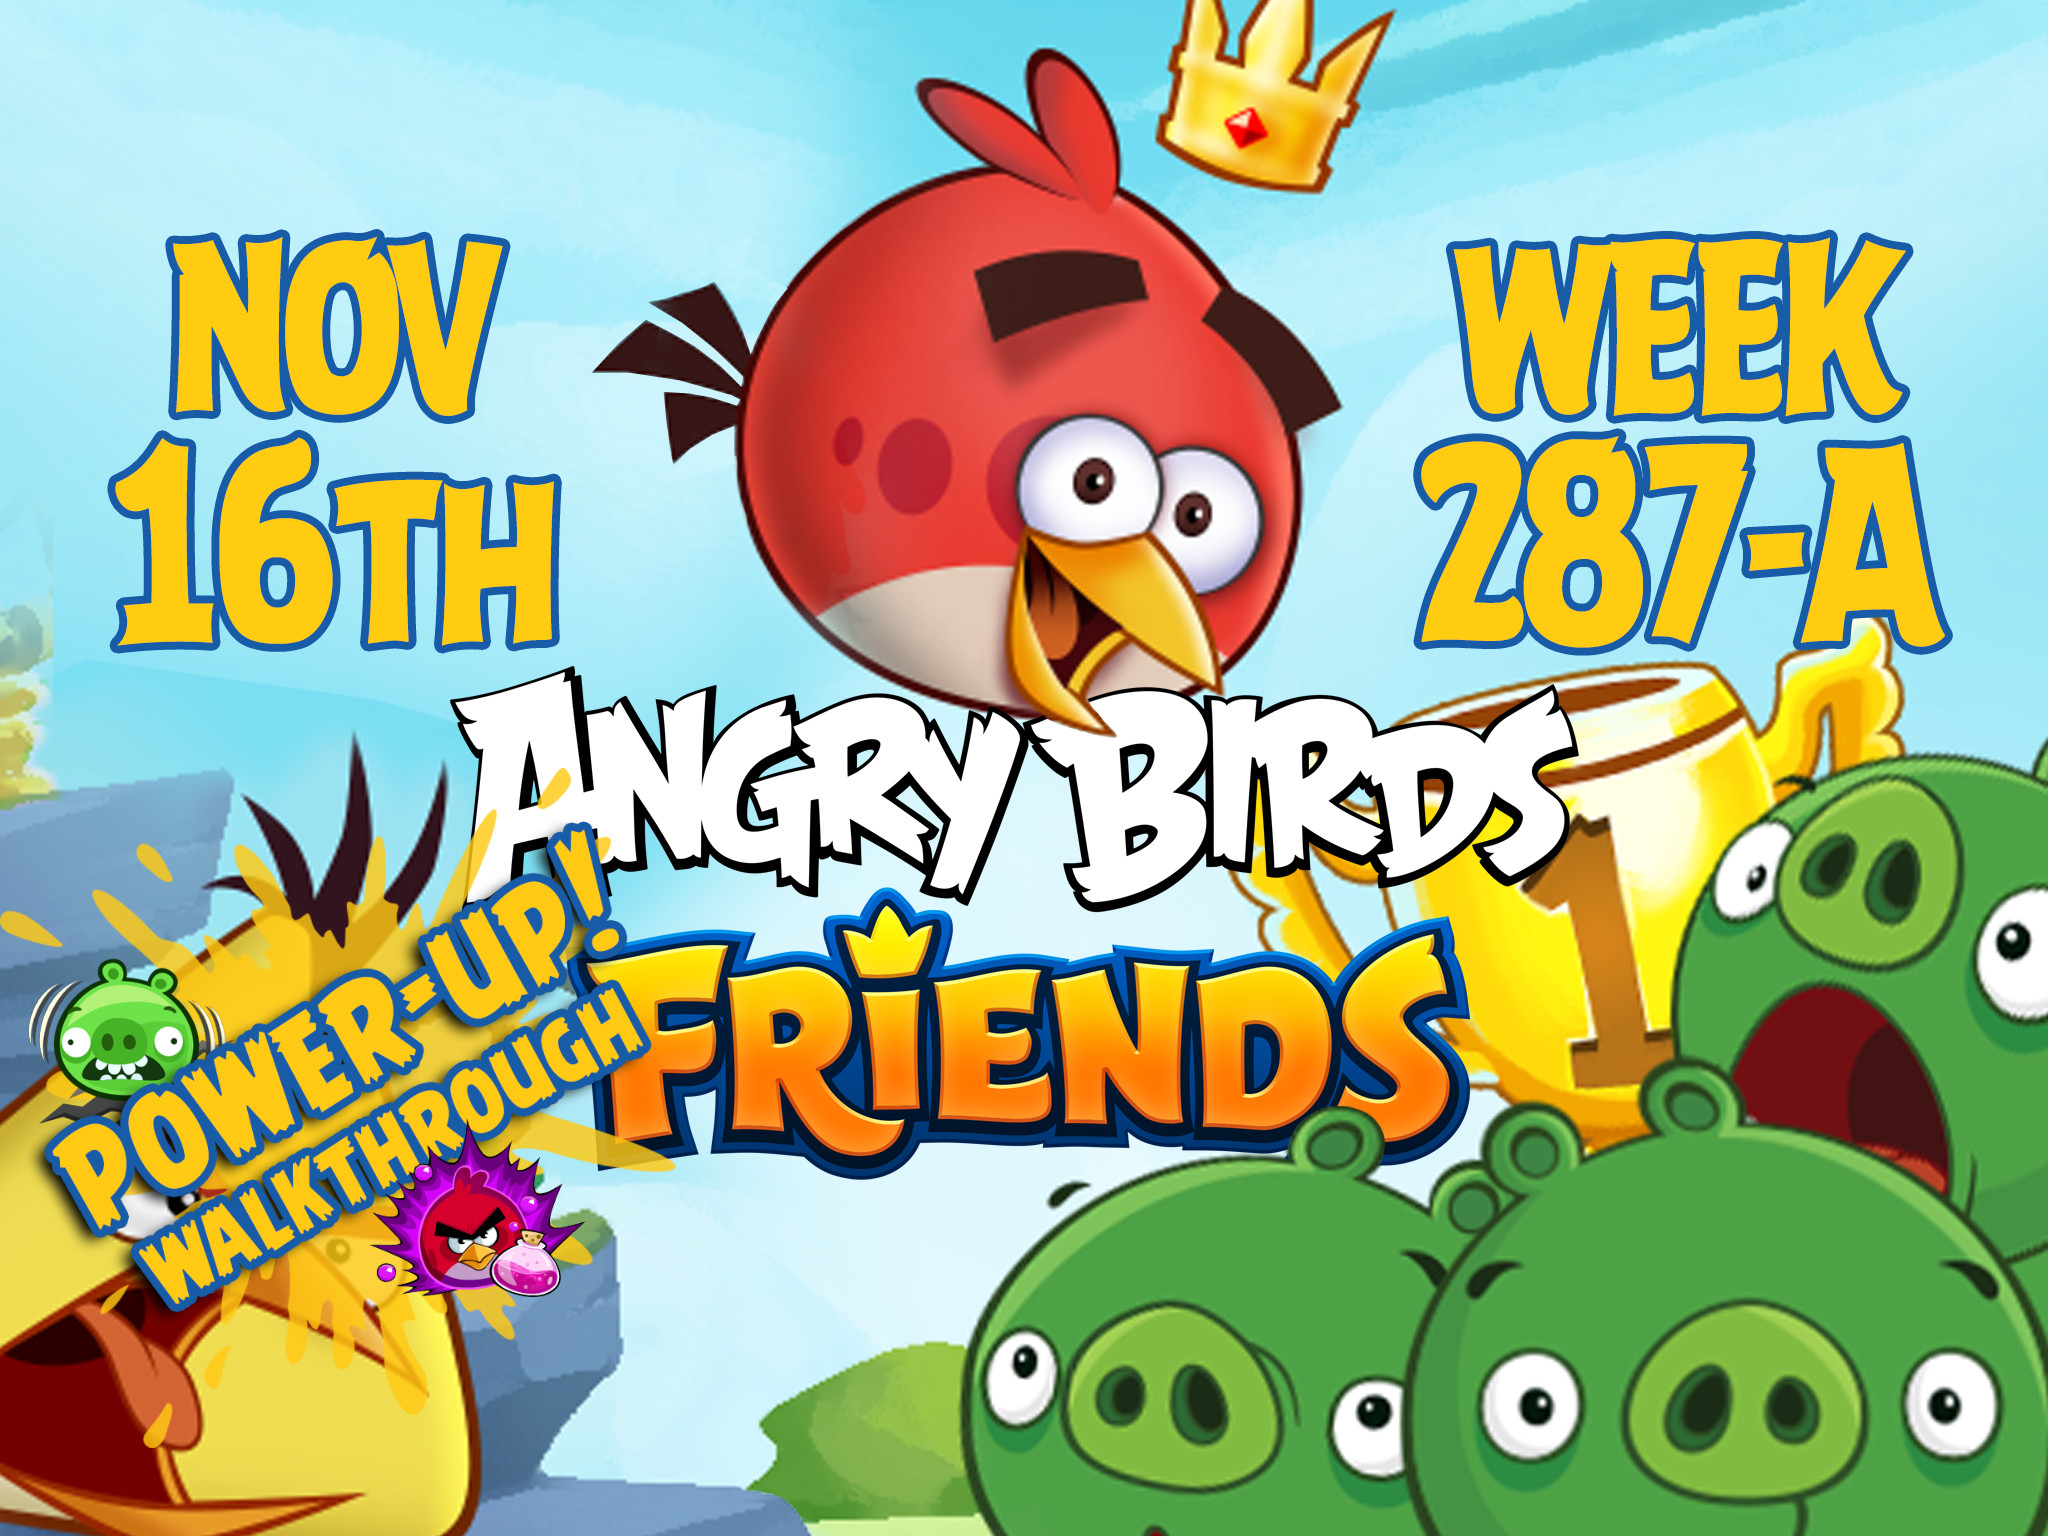 Angry Birds Friends Tournament Week 287-A Feature Image PU